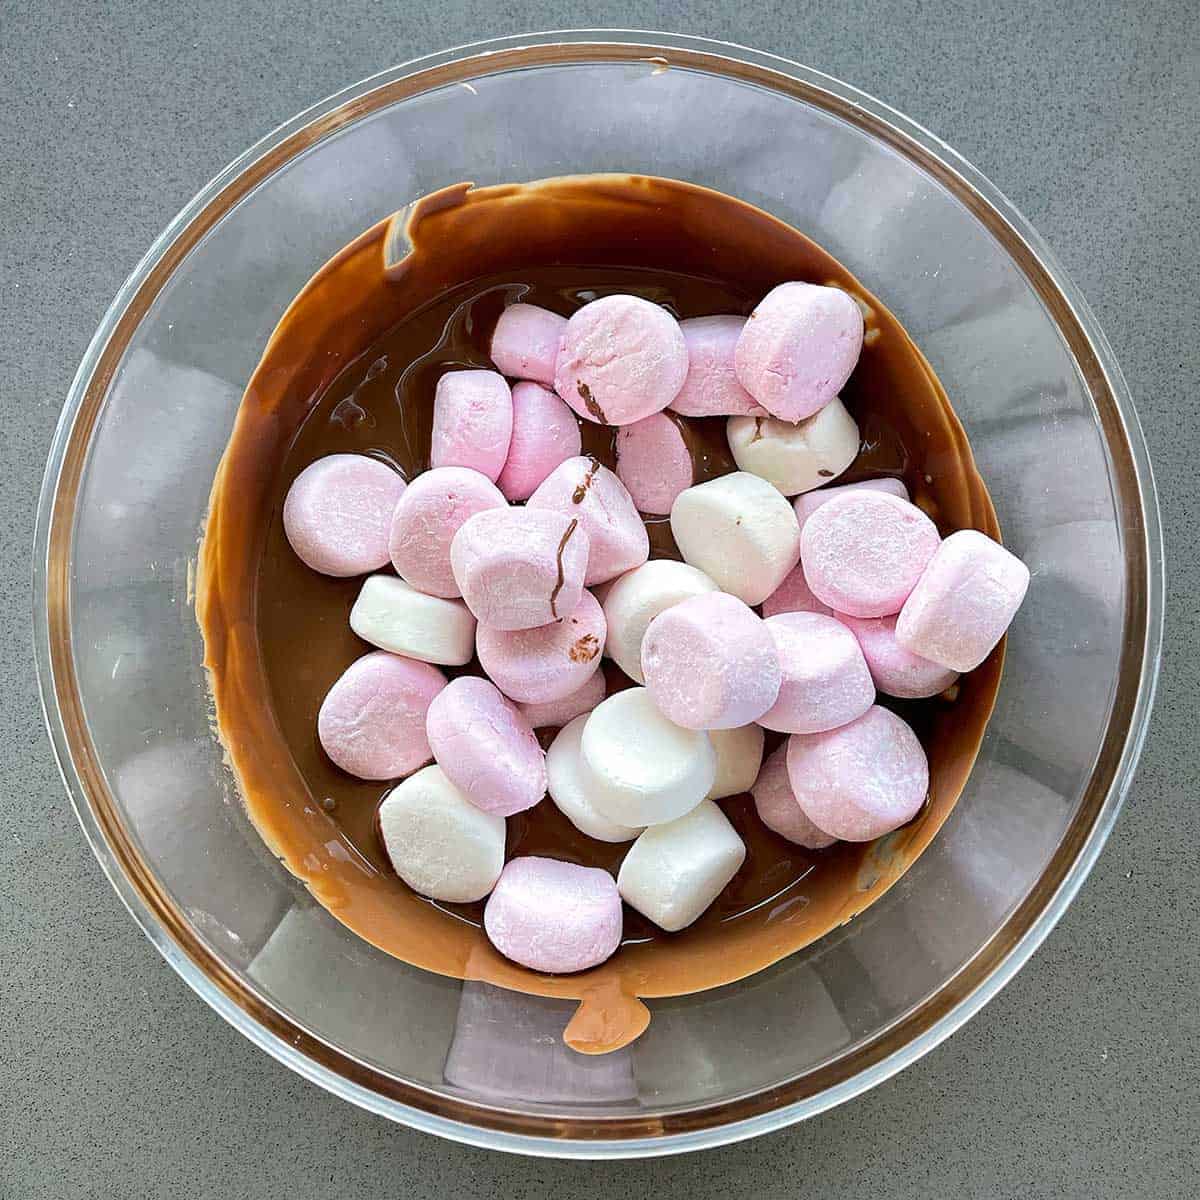 Marshmallows and melted chocolate in a glass bowl